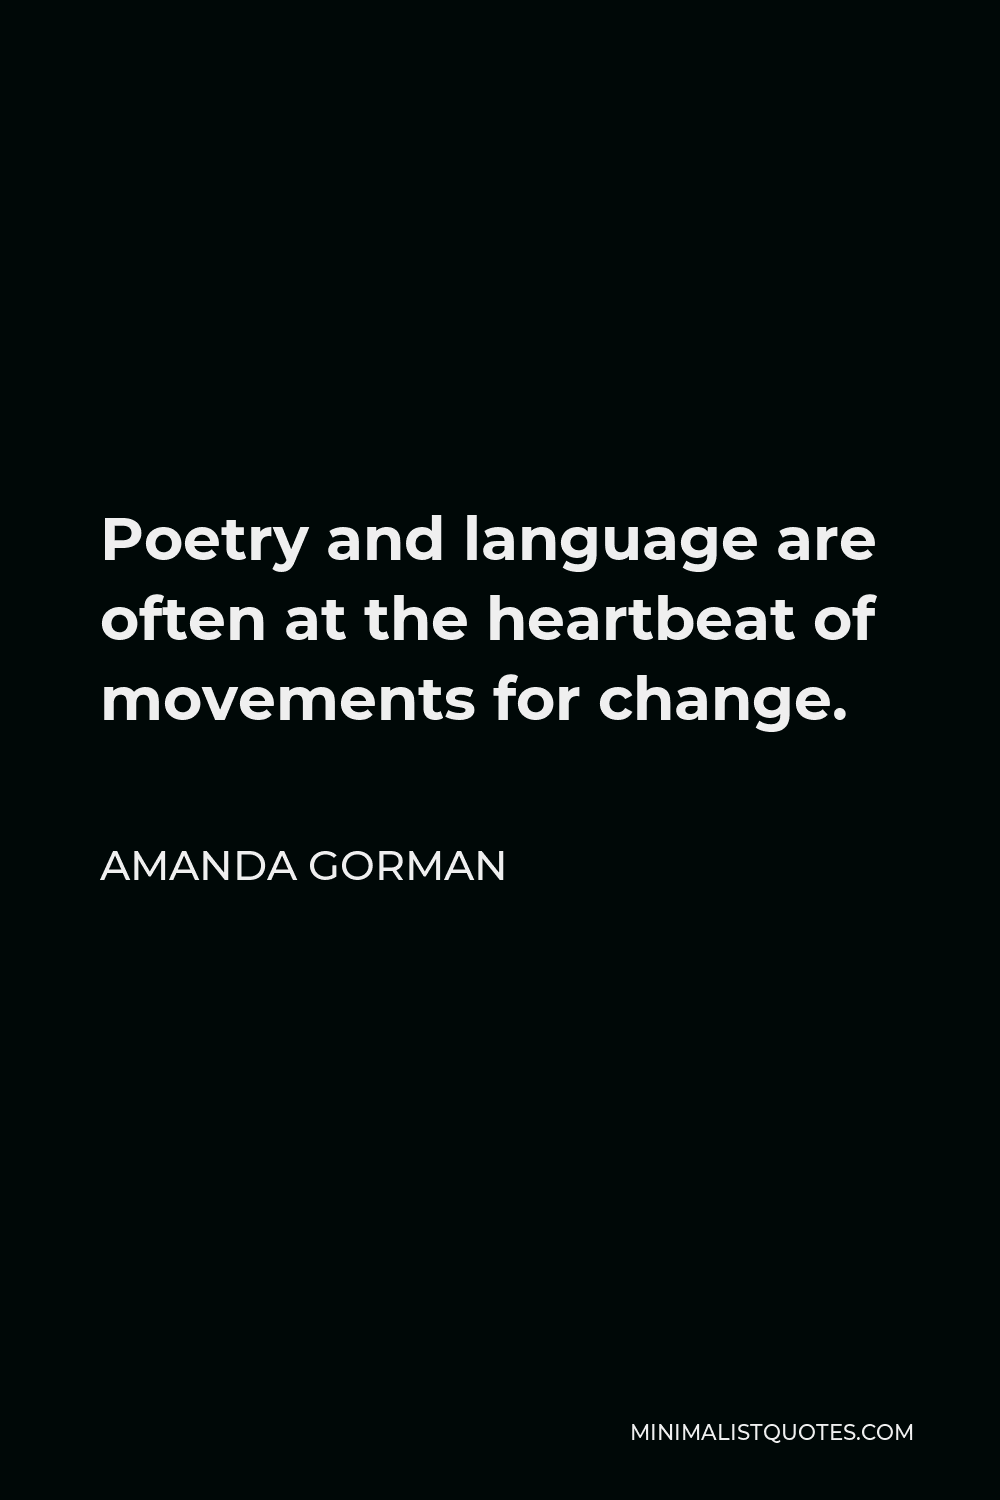 Amanda Gorman Quote - Poetry and language are often at the heartbeat of movements for change.